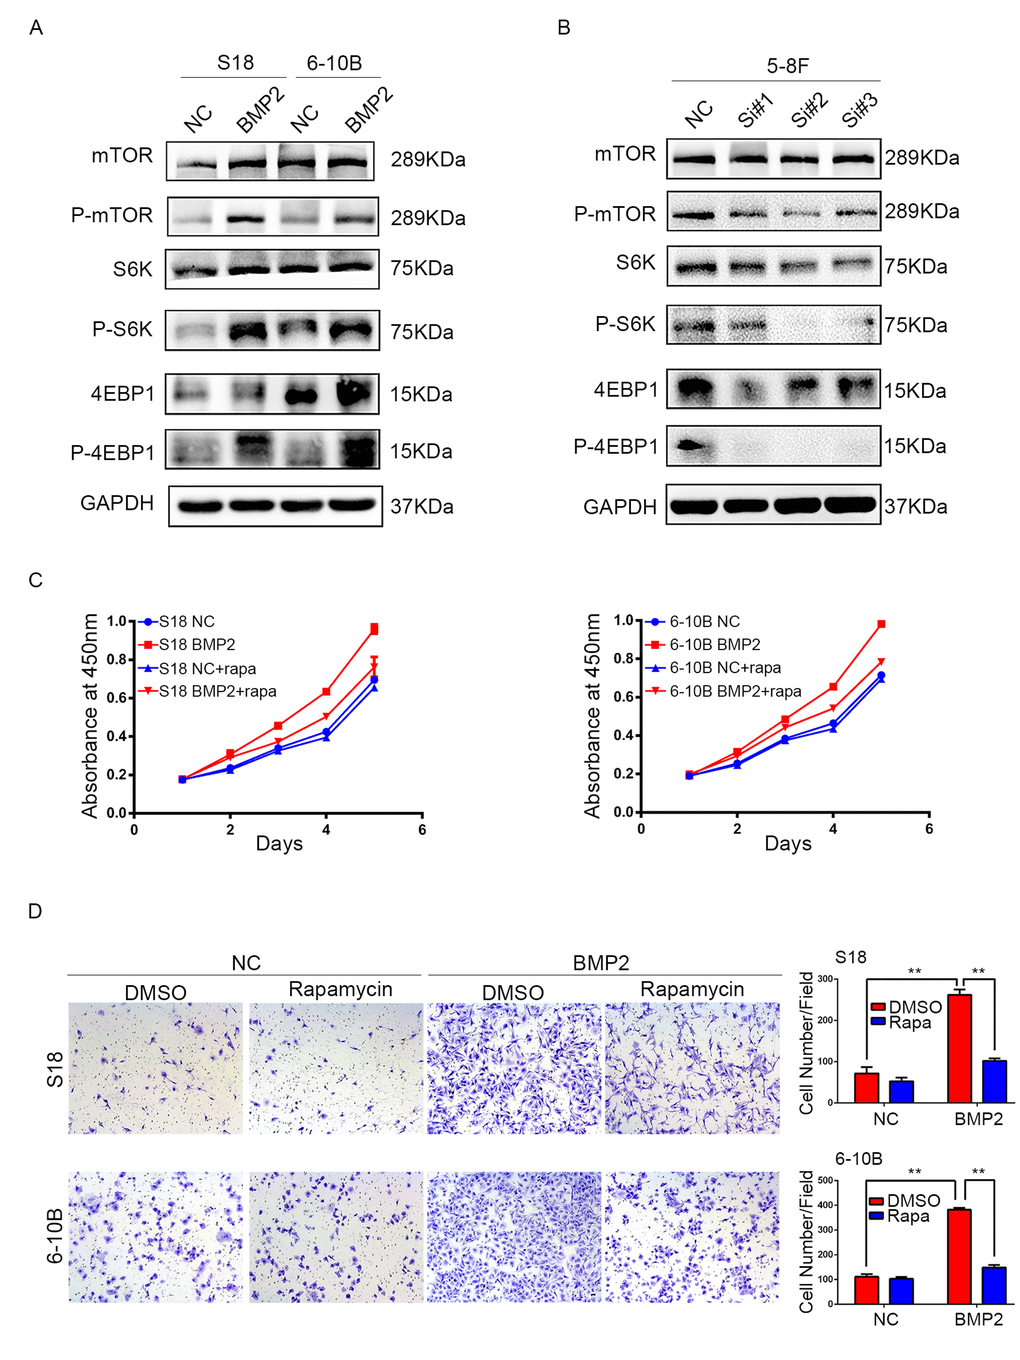 BMP2 activates mTOR signal pathway in NPC cells. (A) Western blotting analysis revealed that in S18-BMP2 and 6-10B-BMP2 cells, the expression of phosphorylated (active) mTOR, P70S6K and 4EBP1 (p-mTOR, p-p70S6k and p-4EBP1) were upregulated compared to those control cells. (B) The expression of p-mTOR, p-p70S6k and p-4EBP1 were downregulated in 5-8F knockdown BMP2 cell. (C) Proliferation abilities of S-18 and 6-10B cells expressing BMP2 or the empty vector was evaluated by CCK8 assay after pretreatment with or without 20 nM of rapamycin. (D) Invasive abilities of S-18 and 6-10B cells expressing BMP2 or the empty vector was evaluated by transwell assay after pretreatment with or without 20 nM of rapamycin.